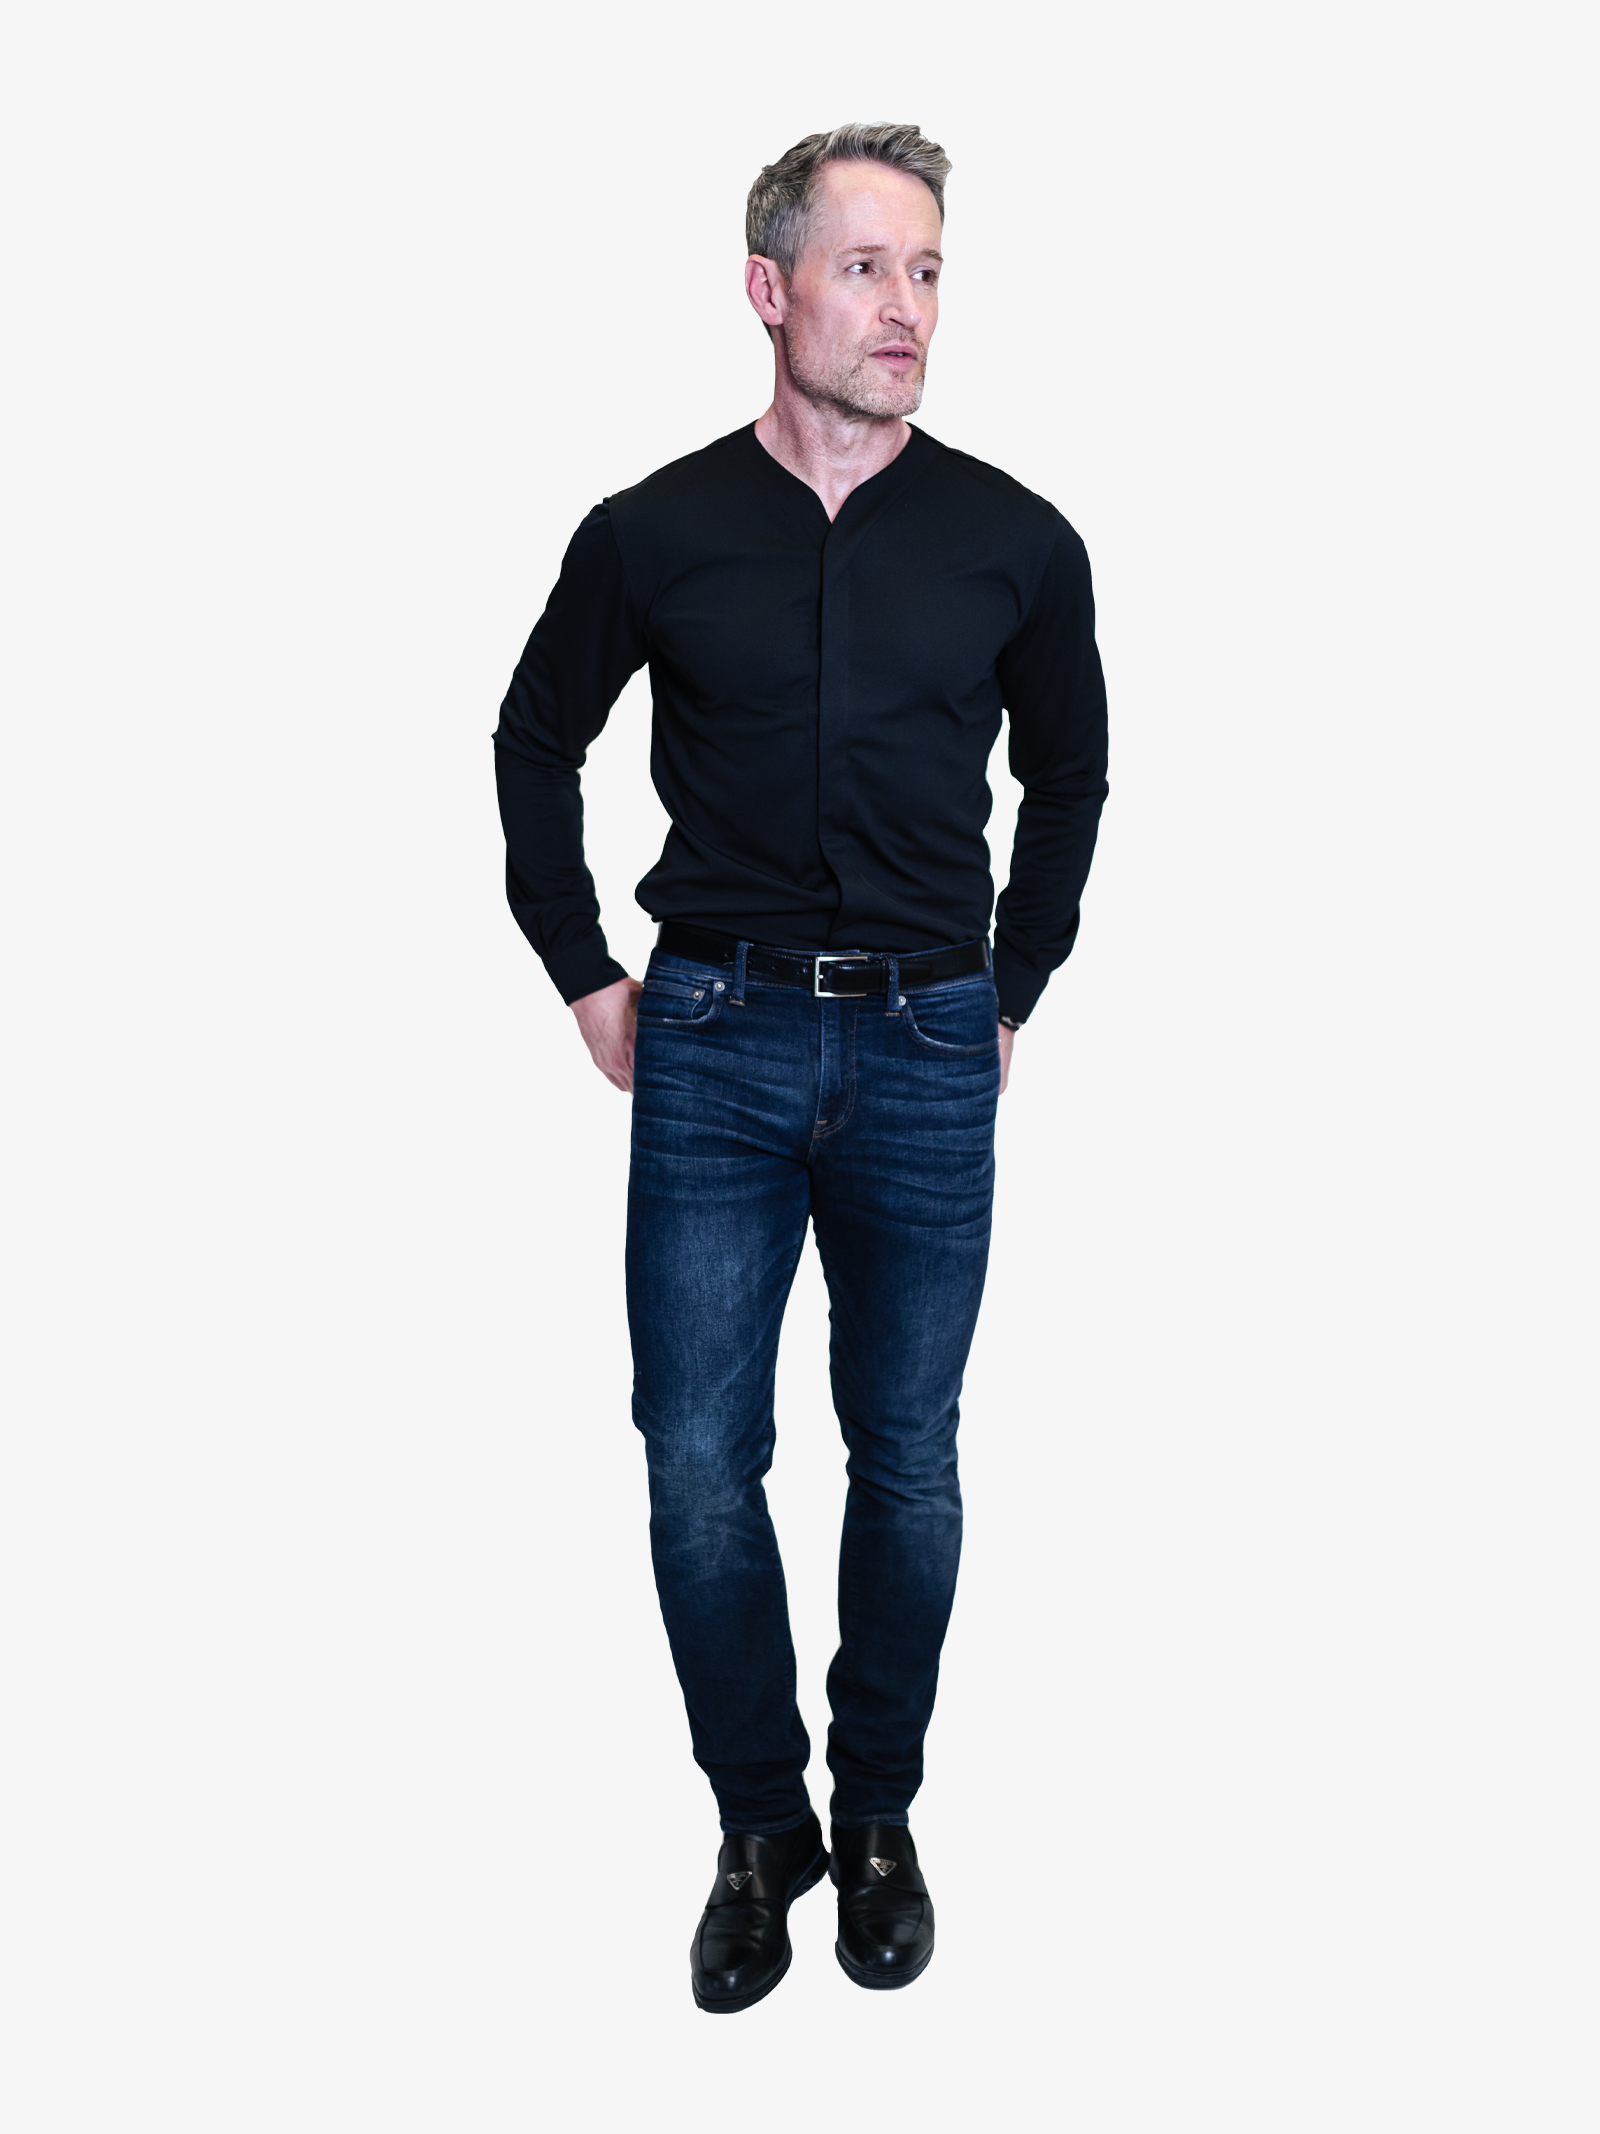 Man wearing a collarless long sleeve dress shirt tucked into a pair of blue jeans